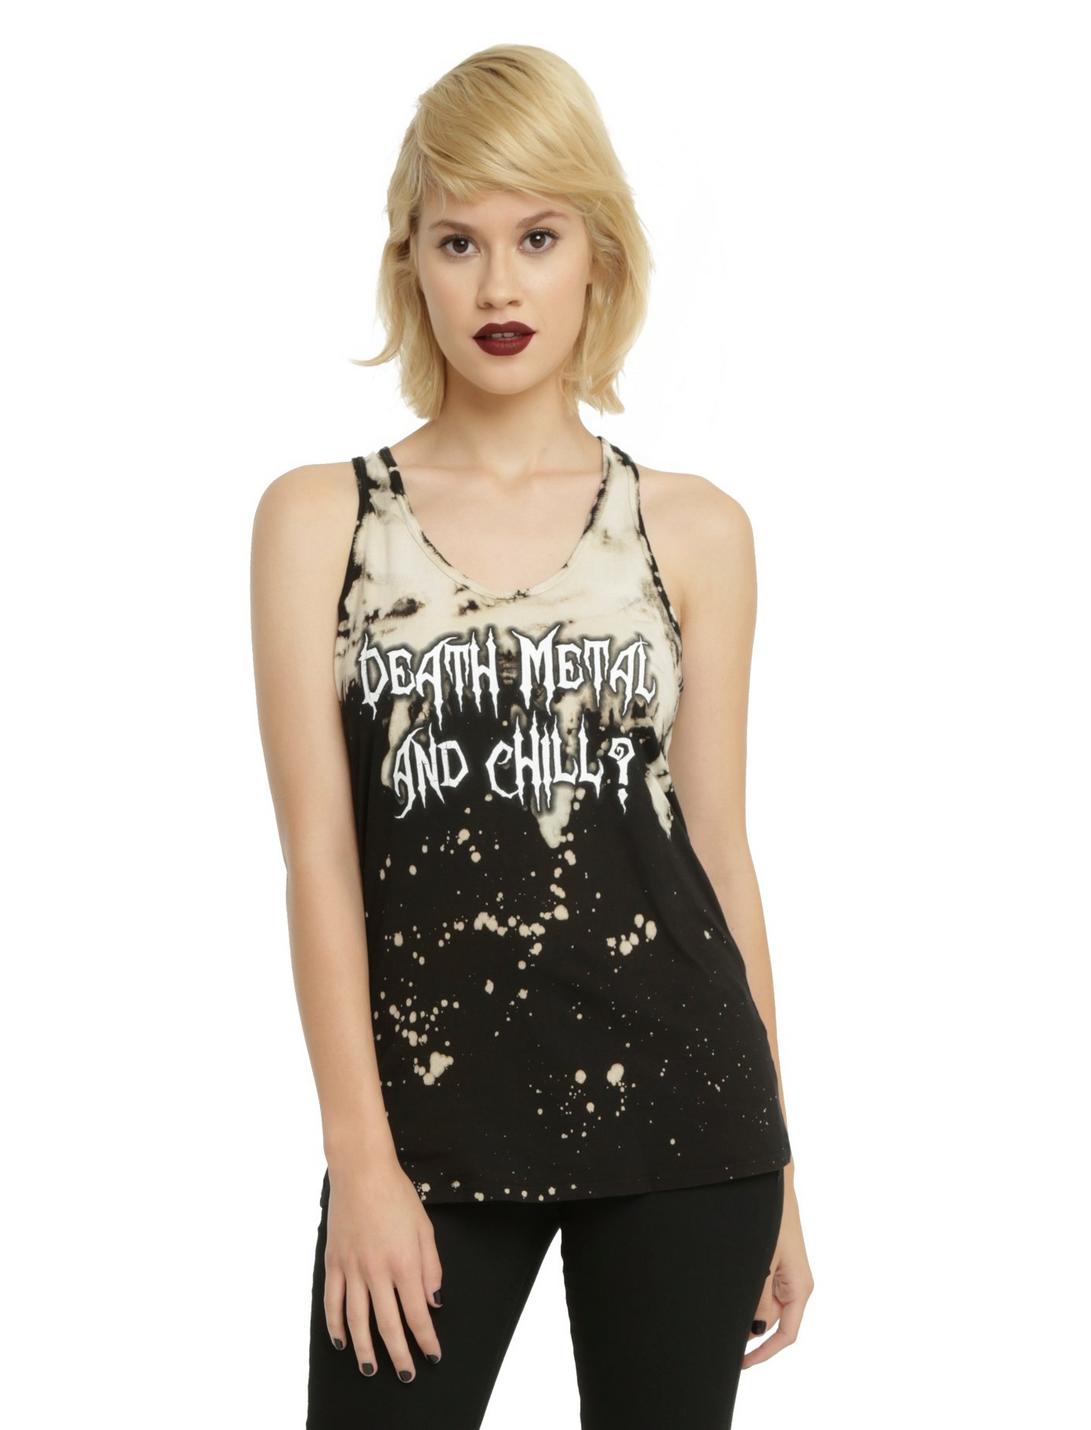 Metal And Chill Girls Tank Top, BLACK, hi-res